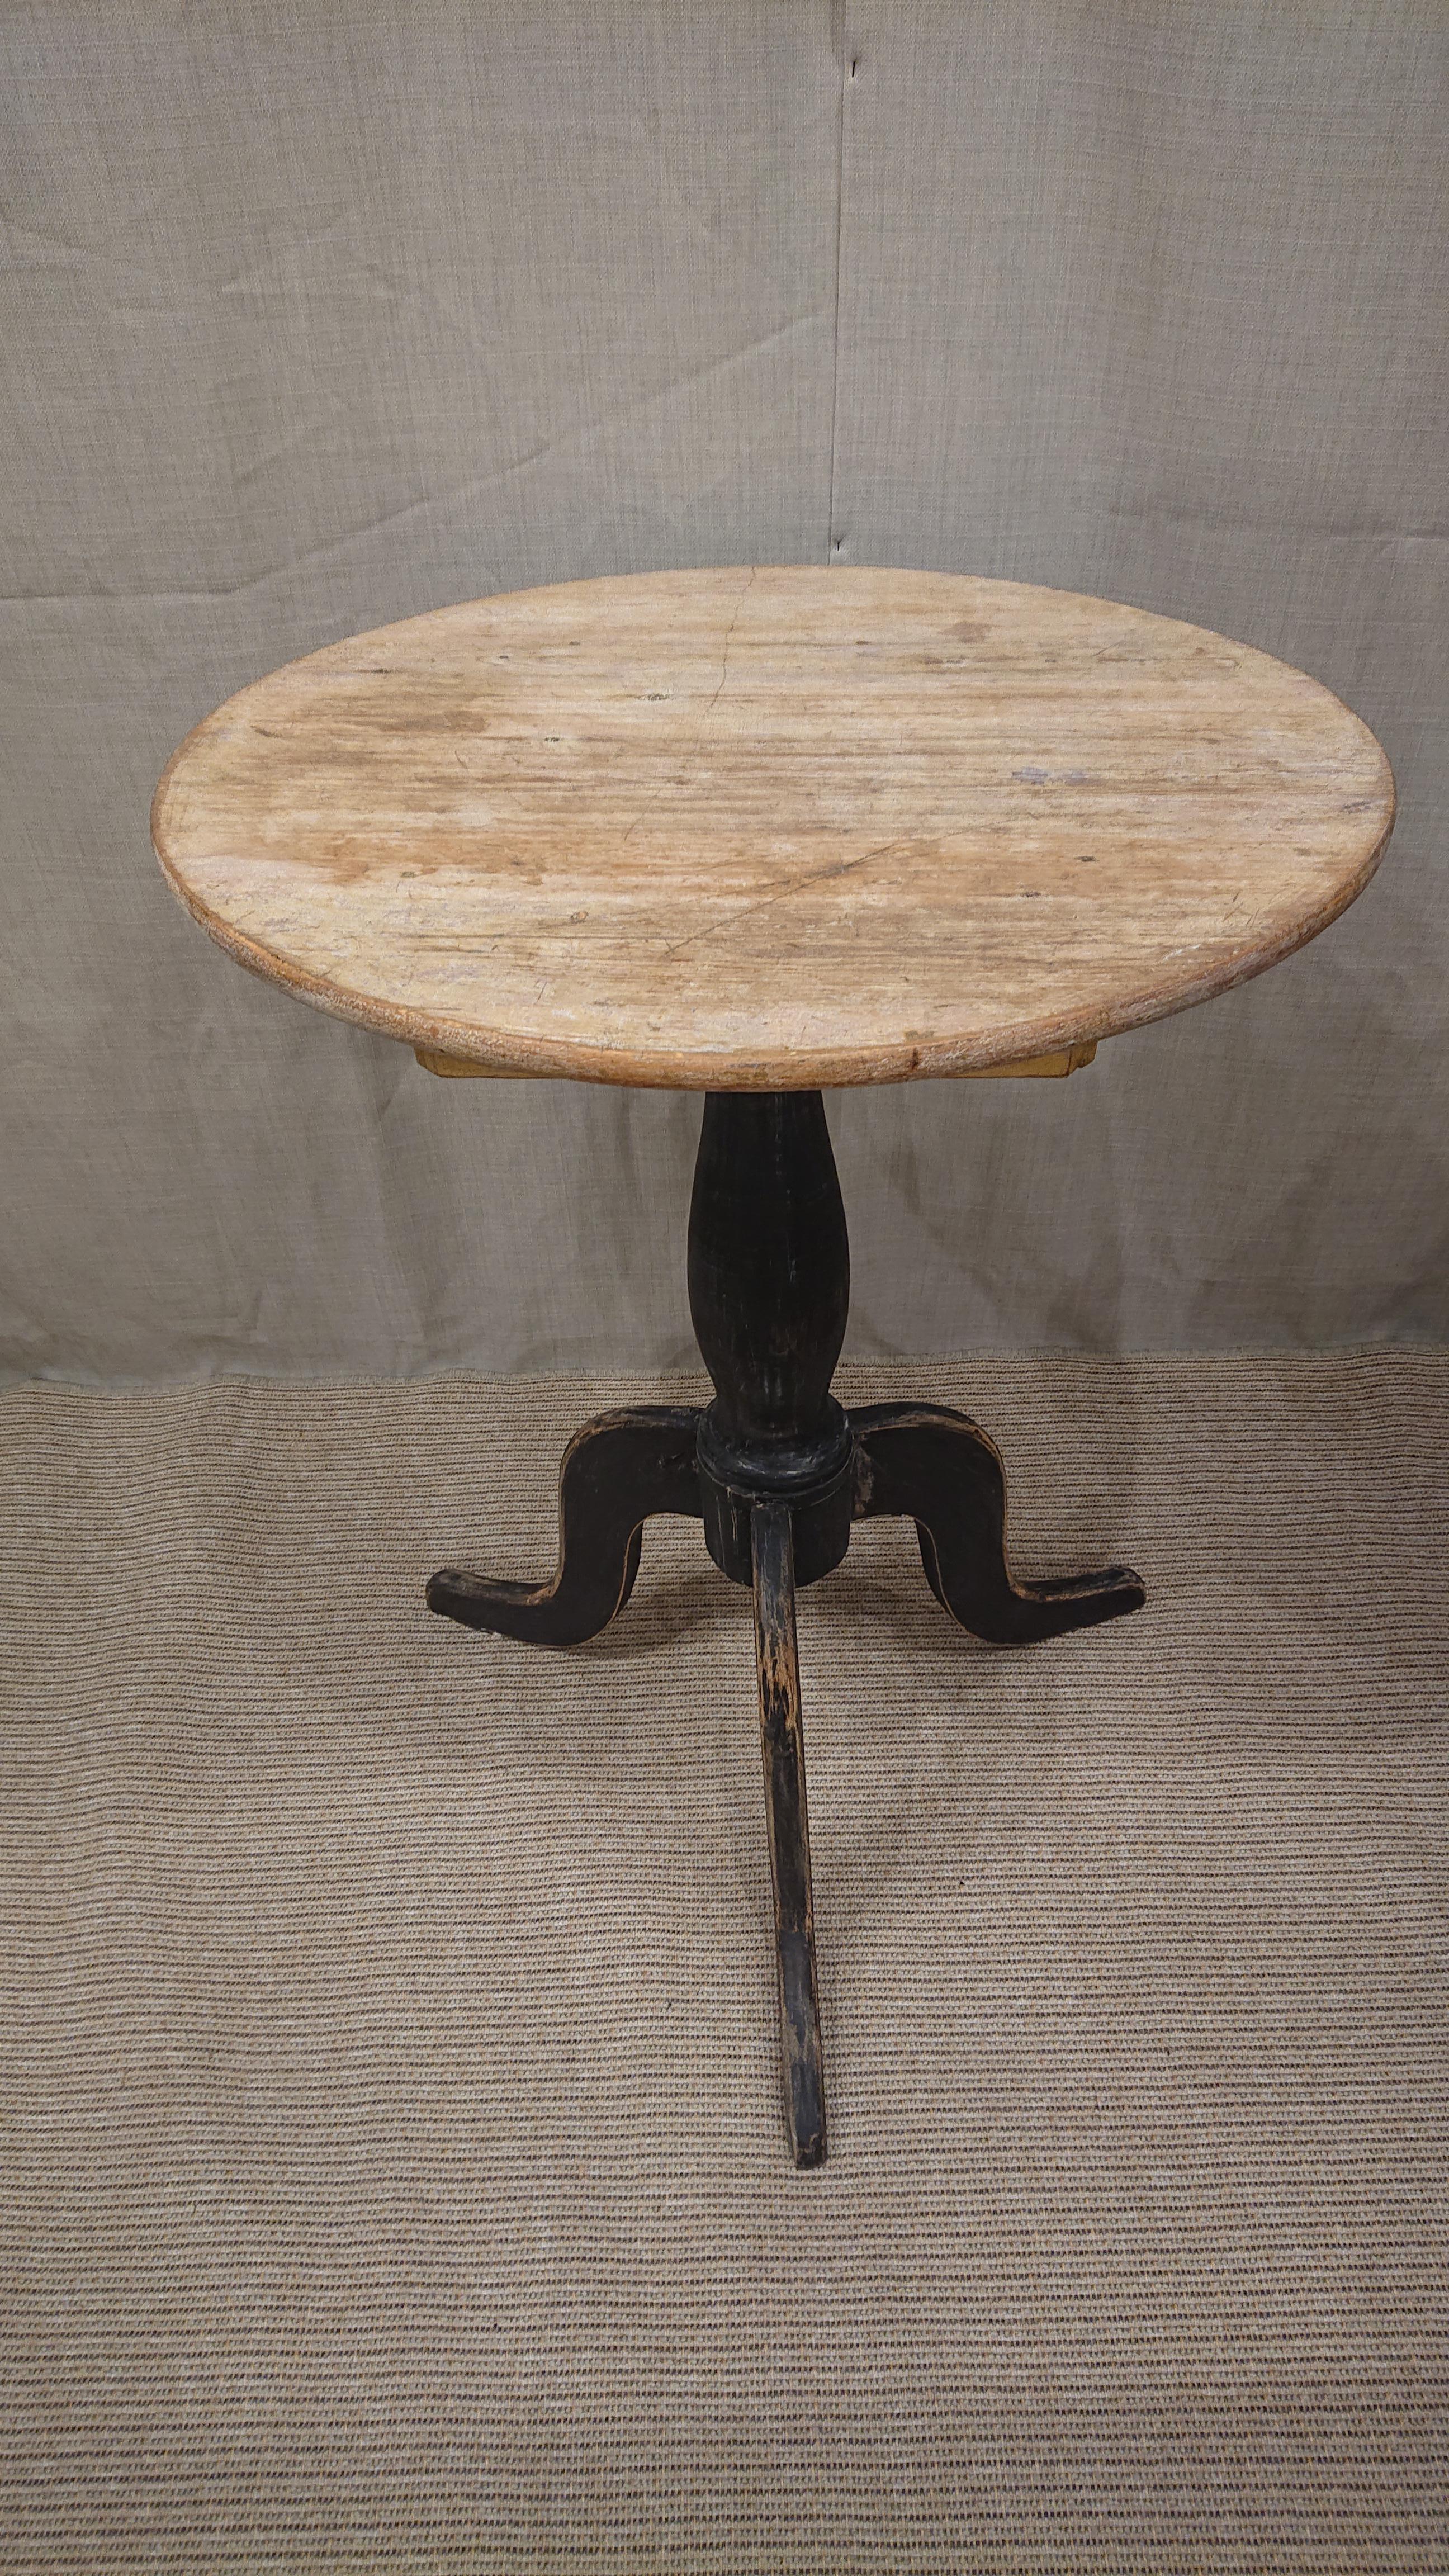 Hand-Carved 19th Century Swedish Empire Pedestal Table with Drawer & Original Paint For Sale